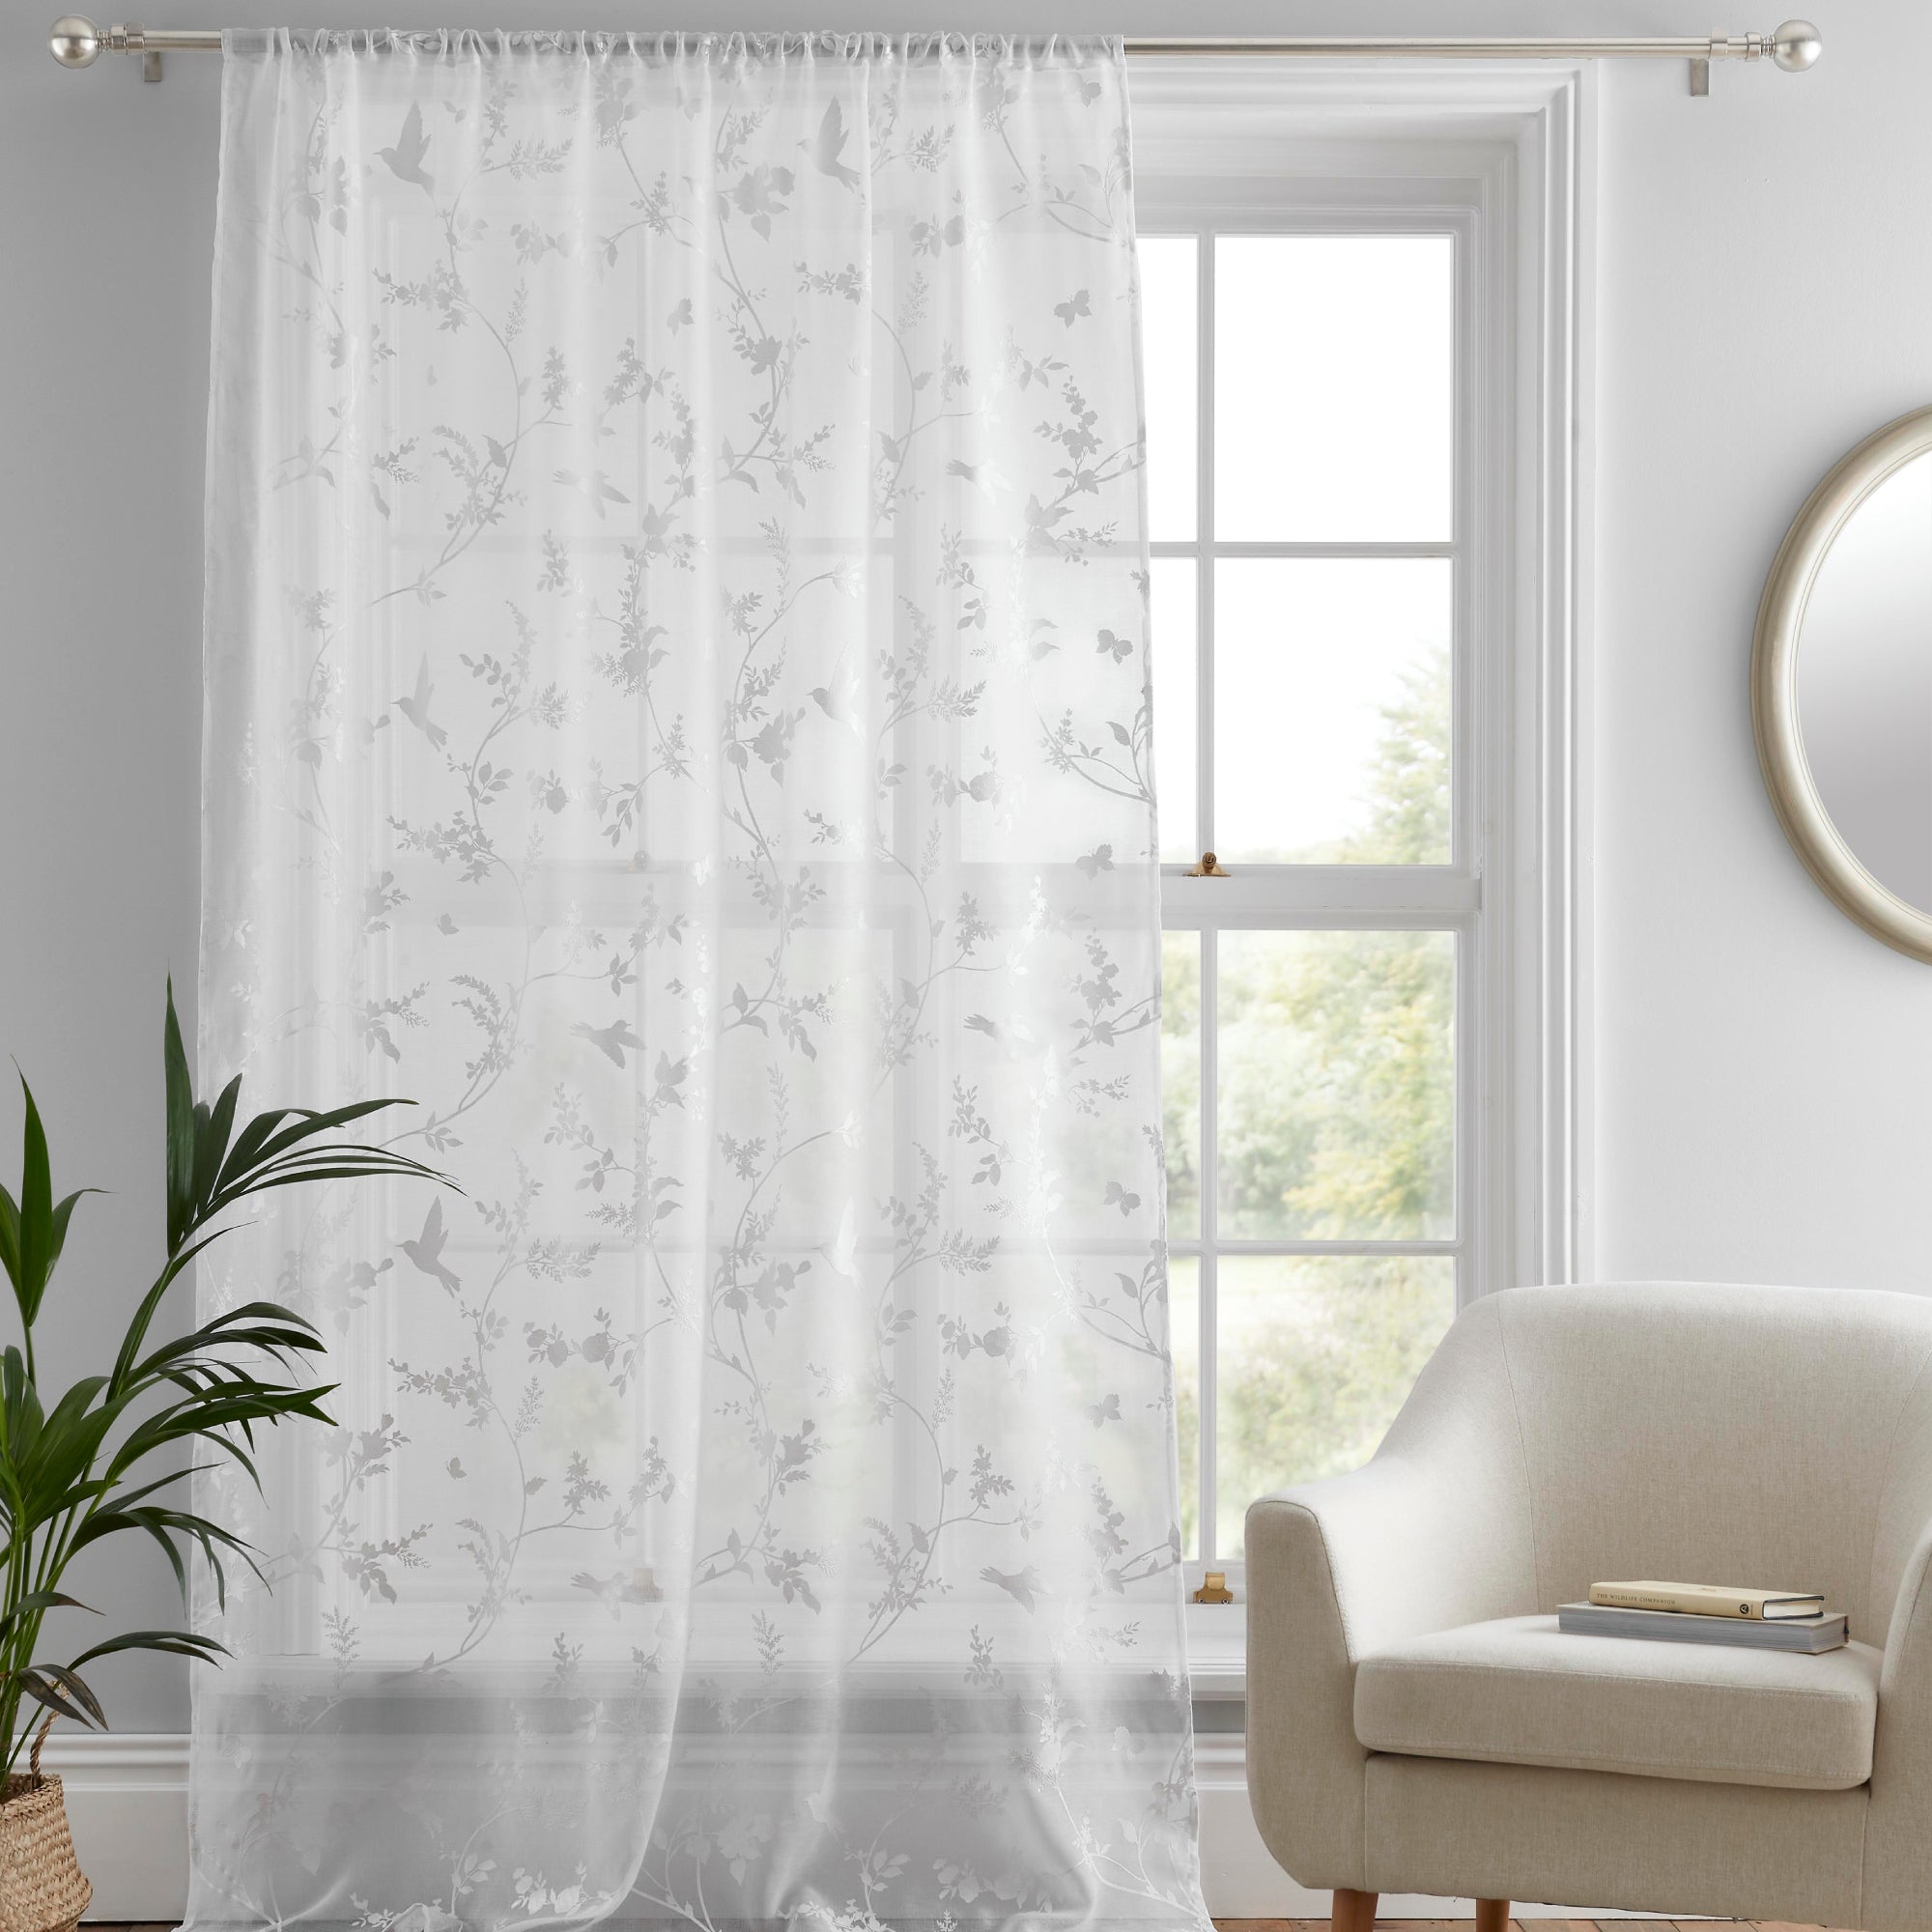 Voile Panel Darnley by Dreams & Drapes Curtains in White